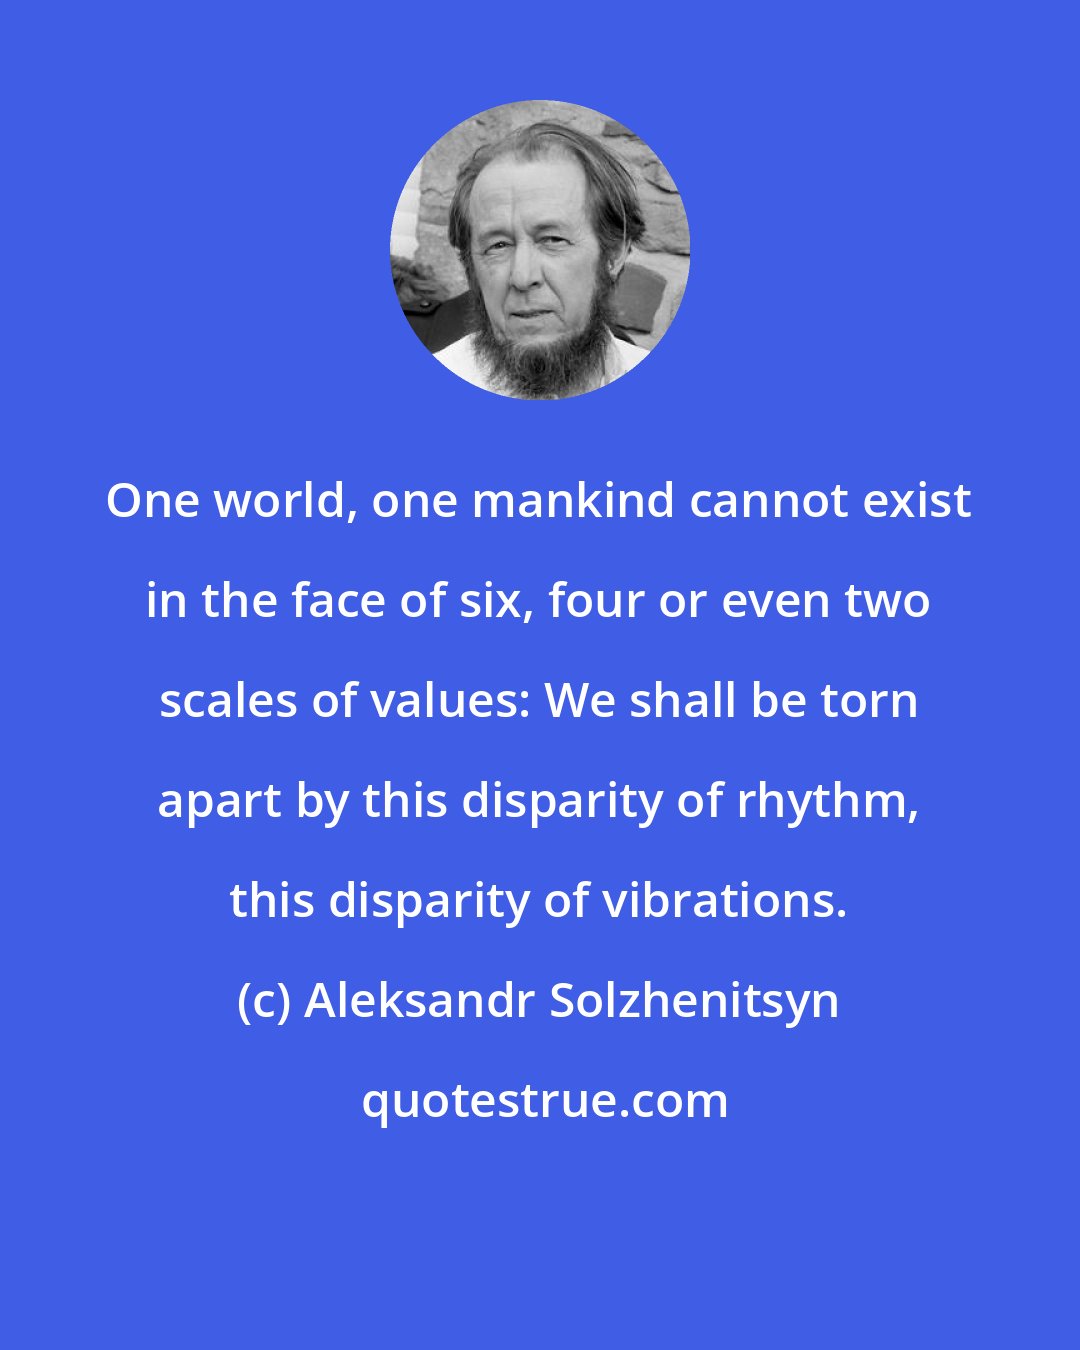 Aleksandr Solzhenitsyn: One world, one mankind cannot exist in the face of six, four or even two scales of values: We shall be torn apart by this disparity of rhythm, this disparity of vibrations.